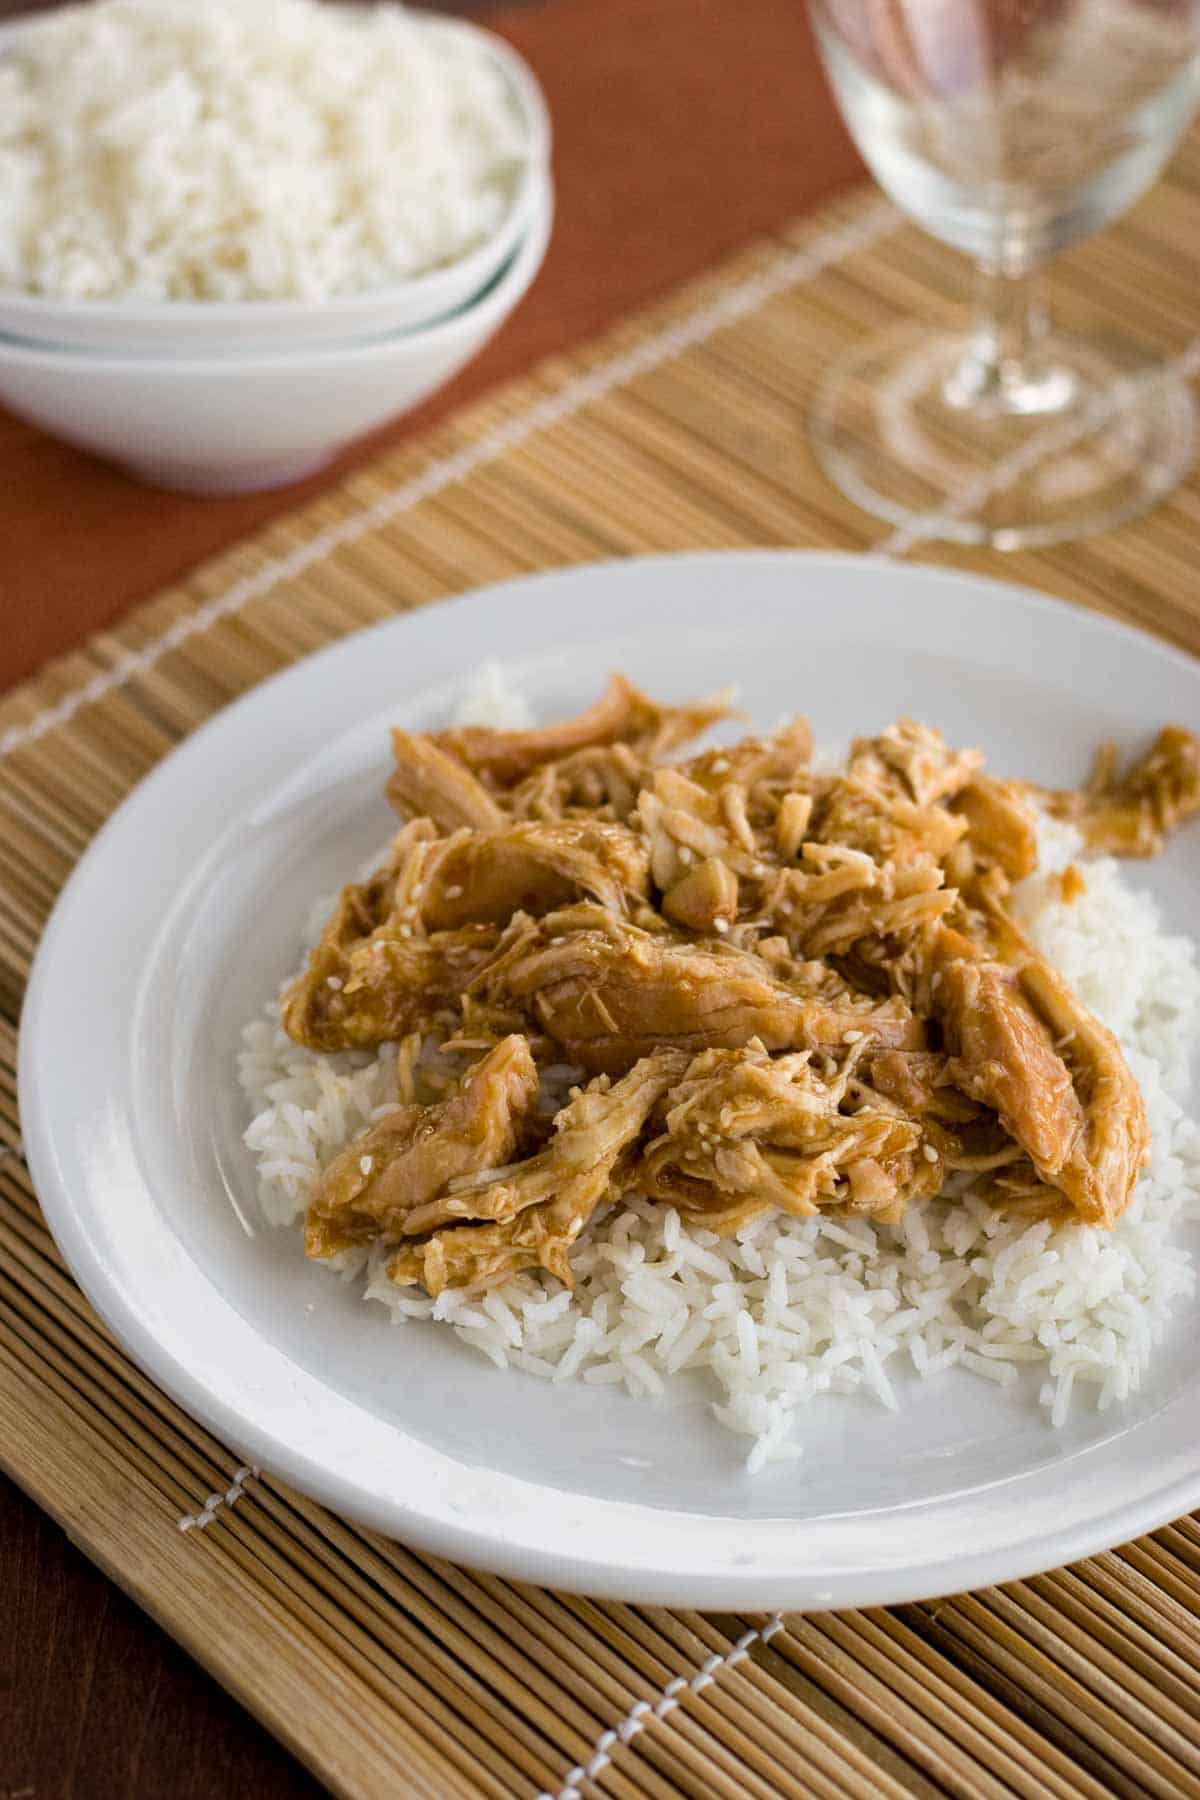 Plate with slow cooker chicken teriyaki over white rice.